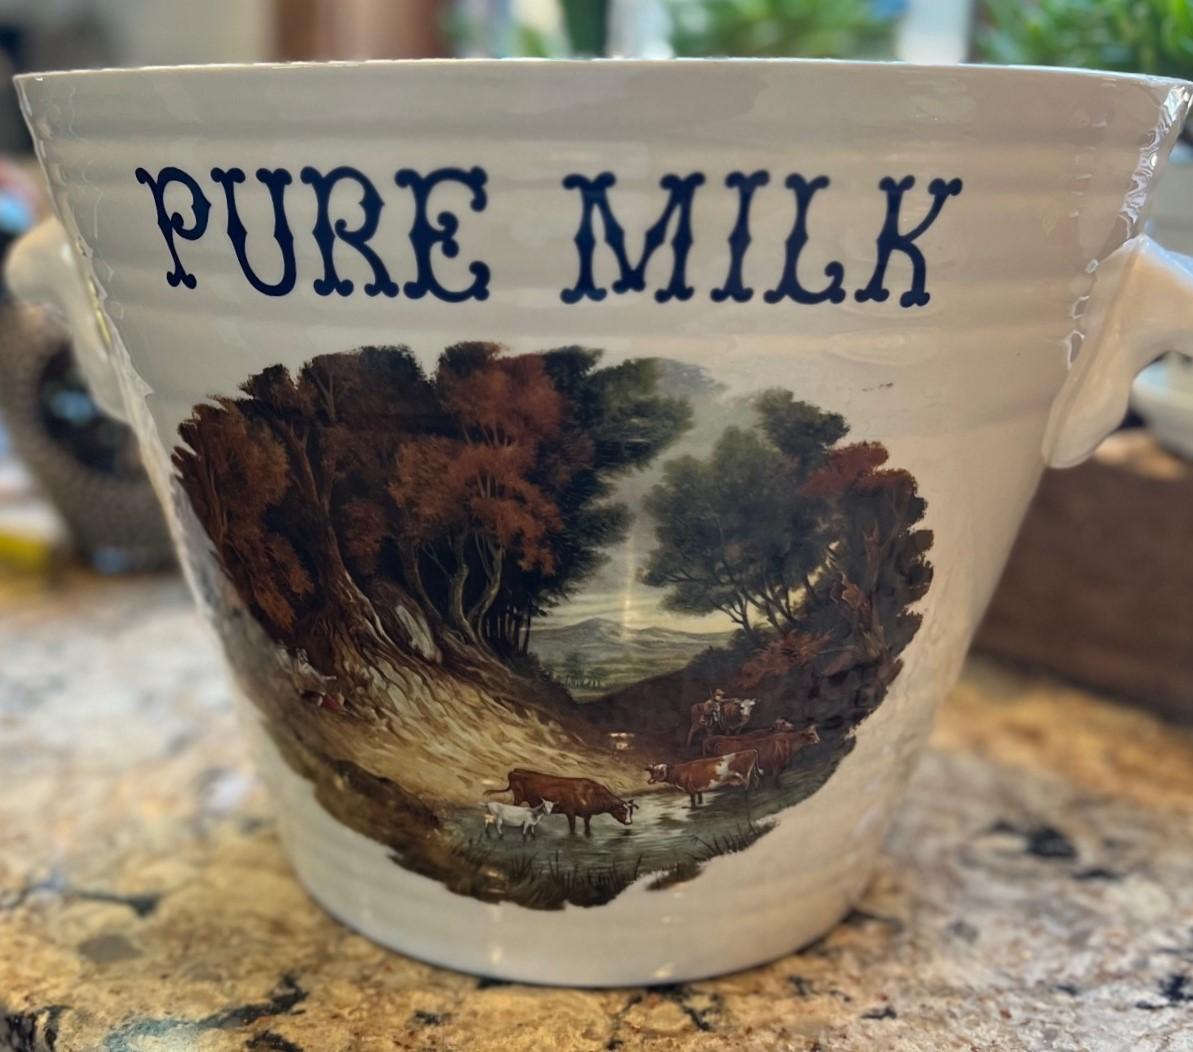 A vintage two-handled Edwardian style ironstone pottery milk pail printed with the words 'Pure Milk' in navy above a transferware graphic of a bucolic English scene. It has a banded design to the ironstone with nicely molded handles applied to each